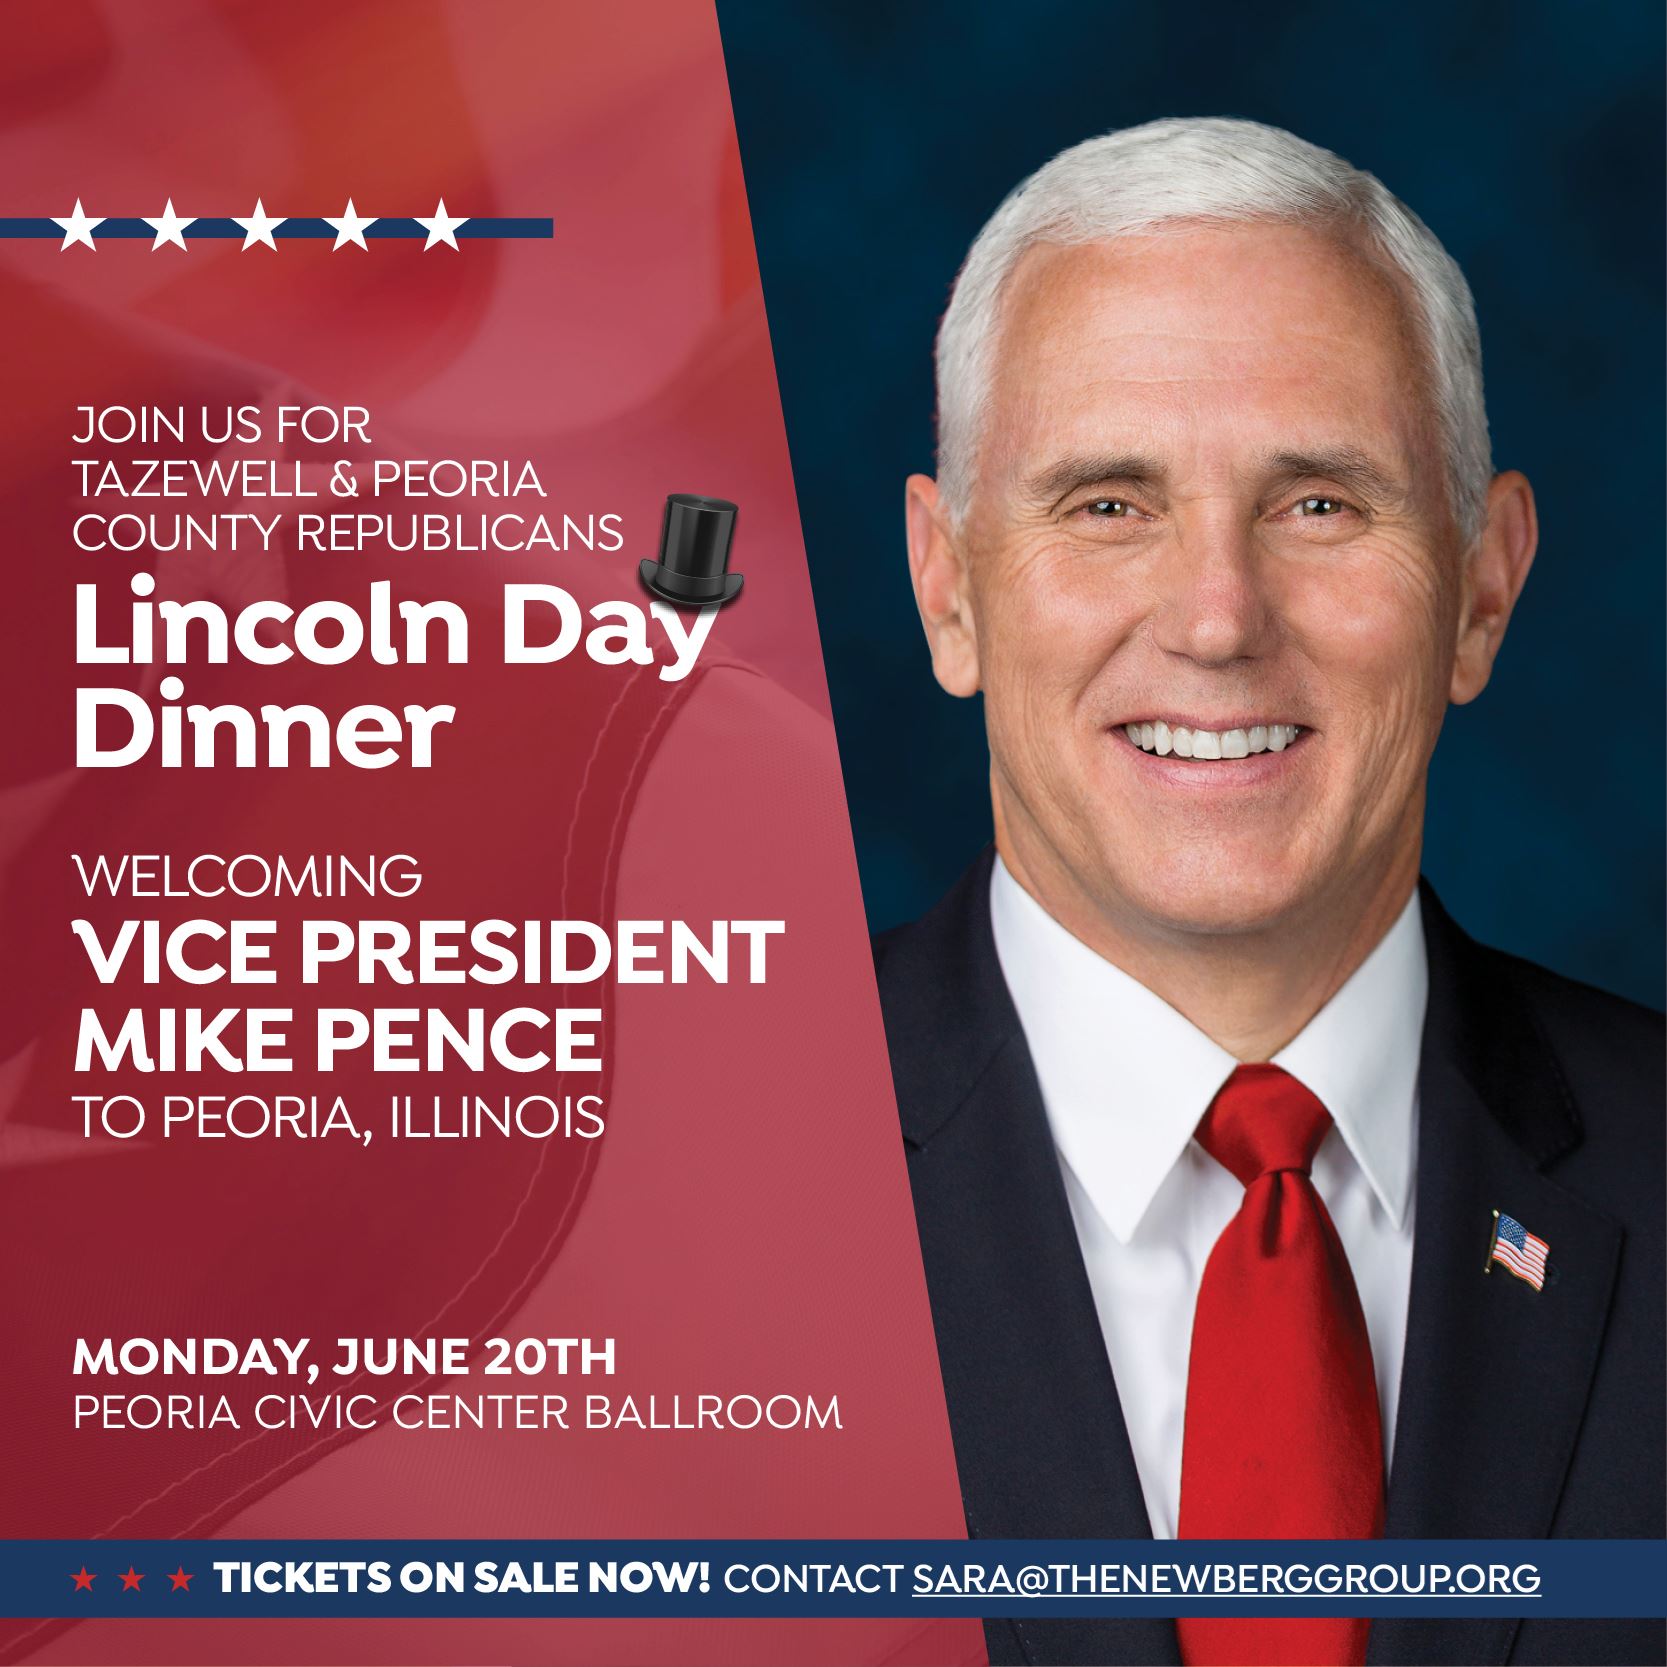 Tazewell & Peoria County Republican’s Lincoln Day Dinner